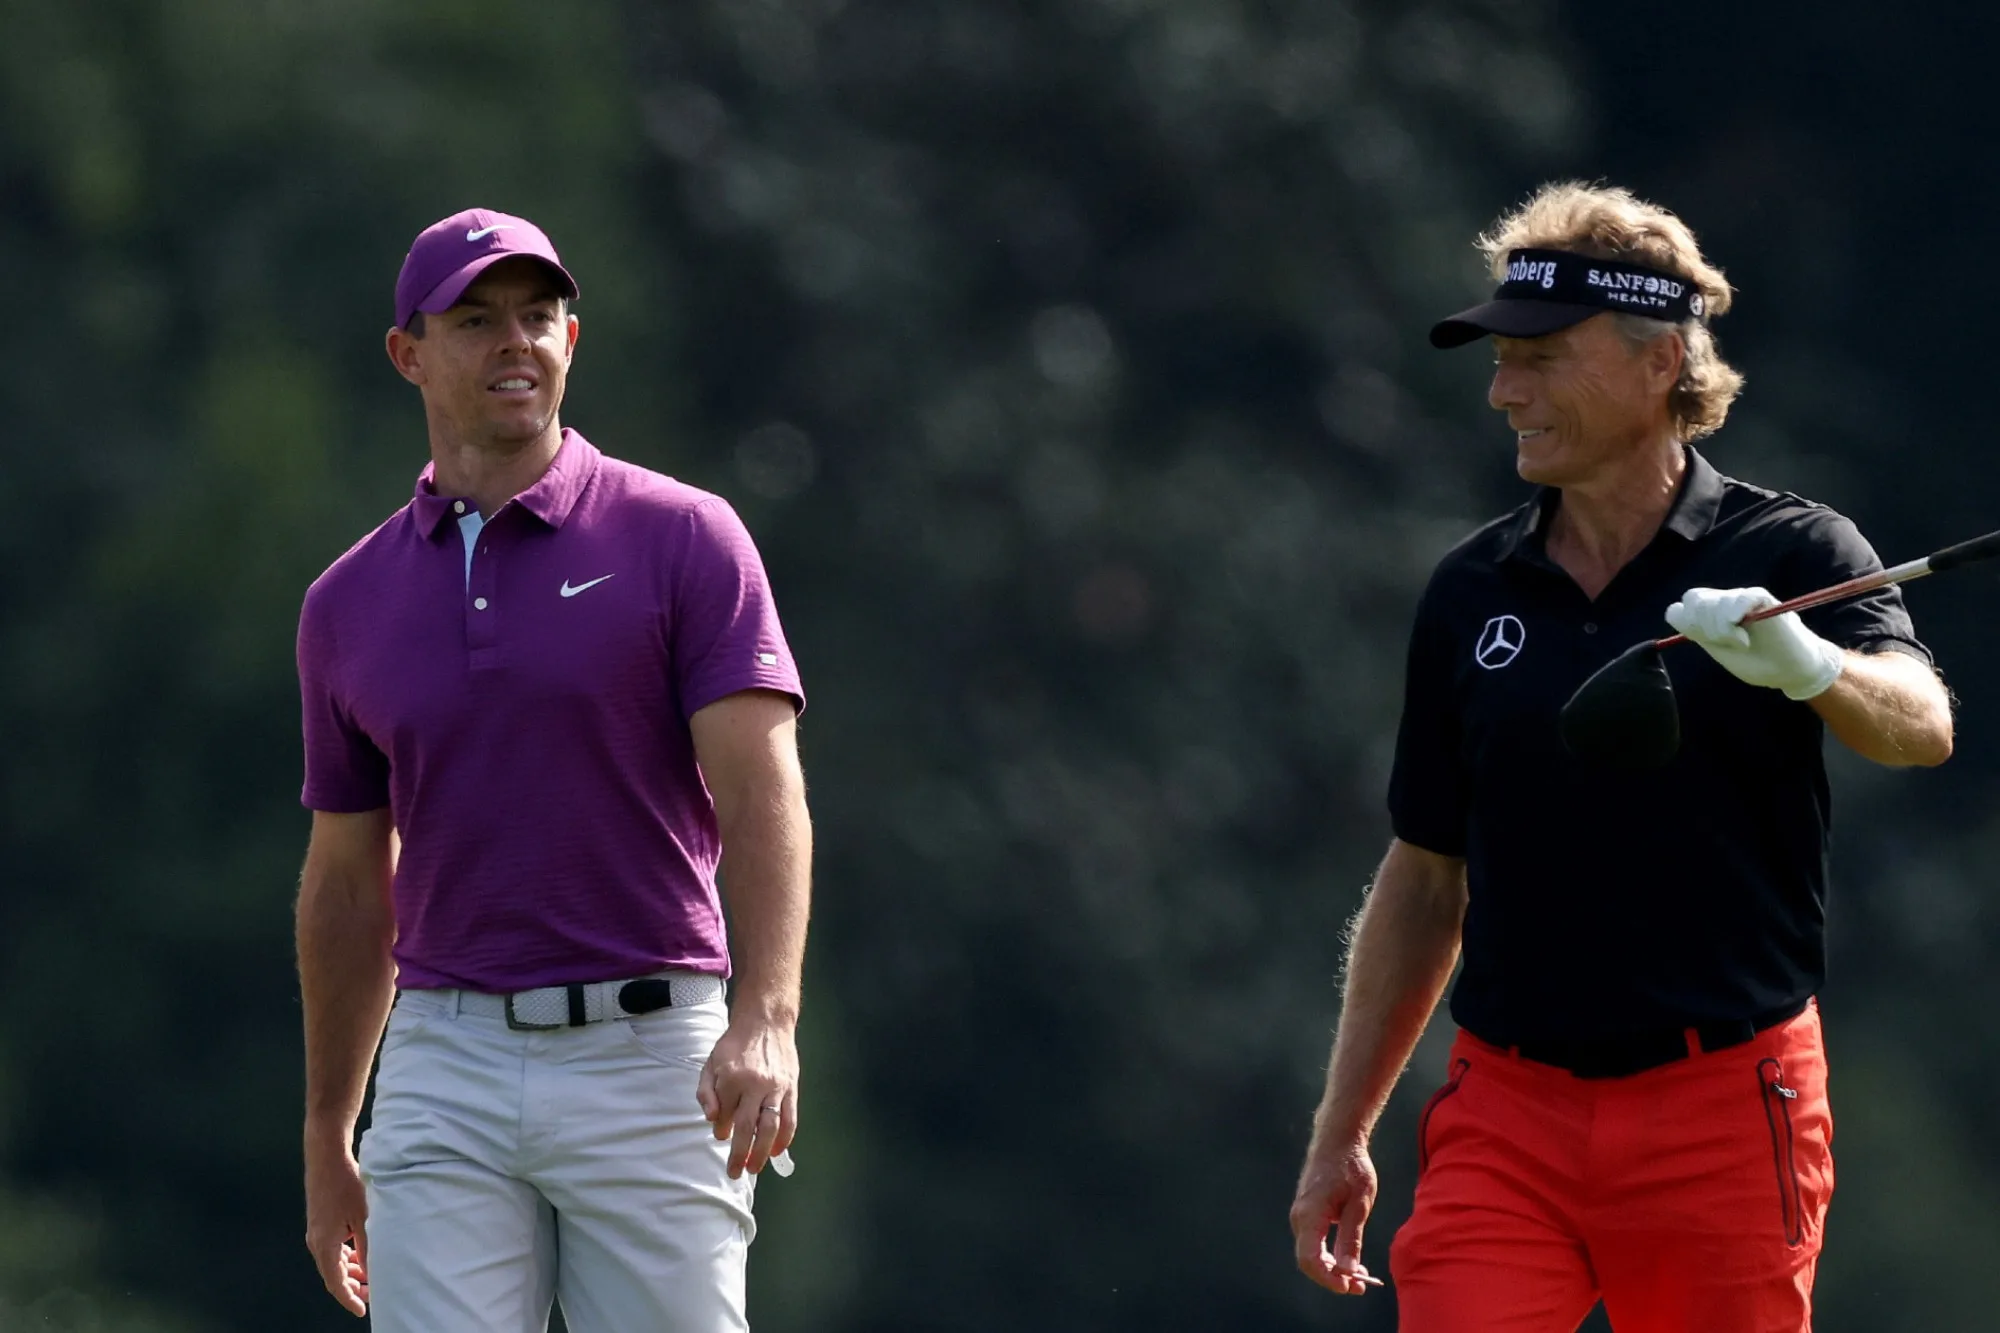 Langer: Rory's picking the wrong player to emulate